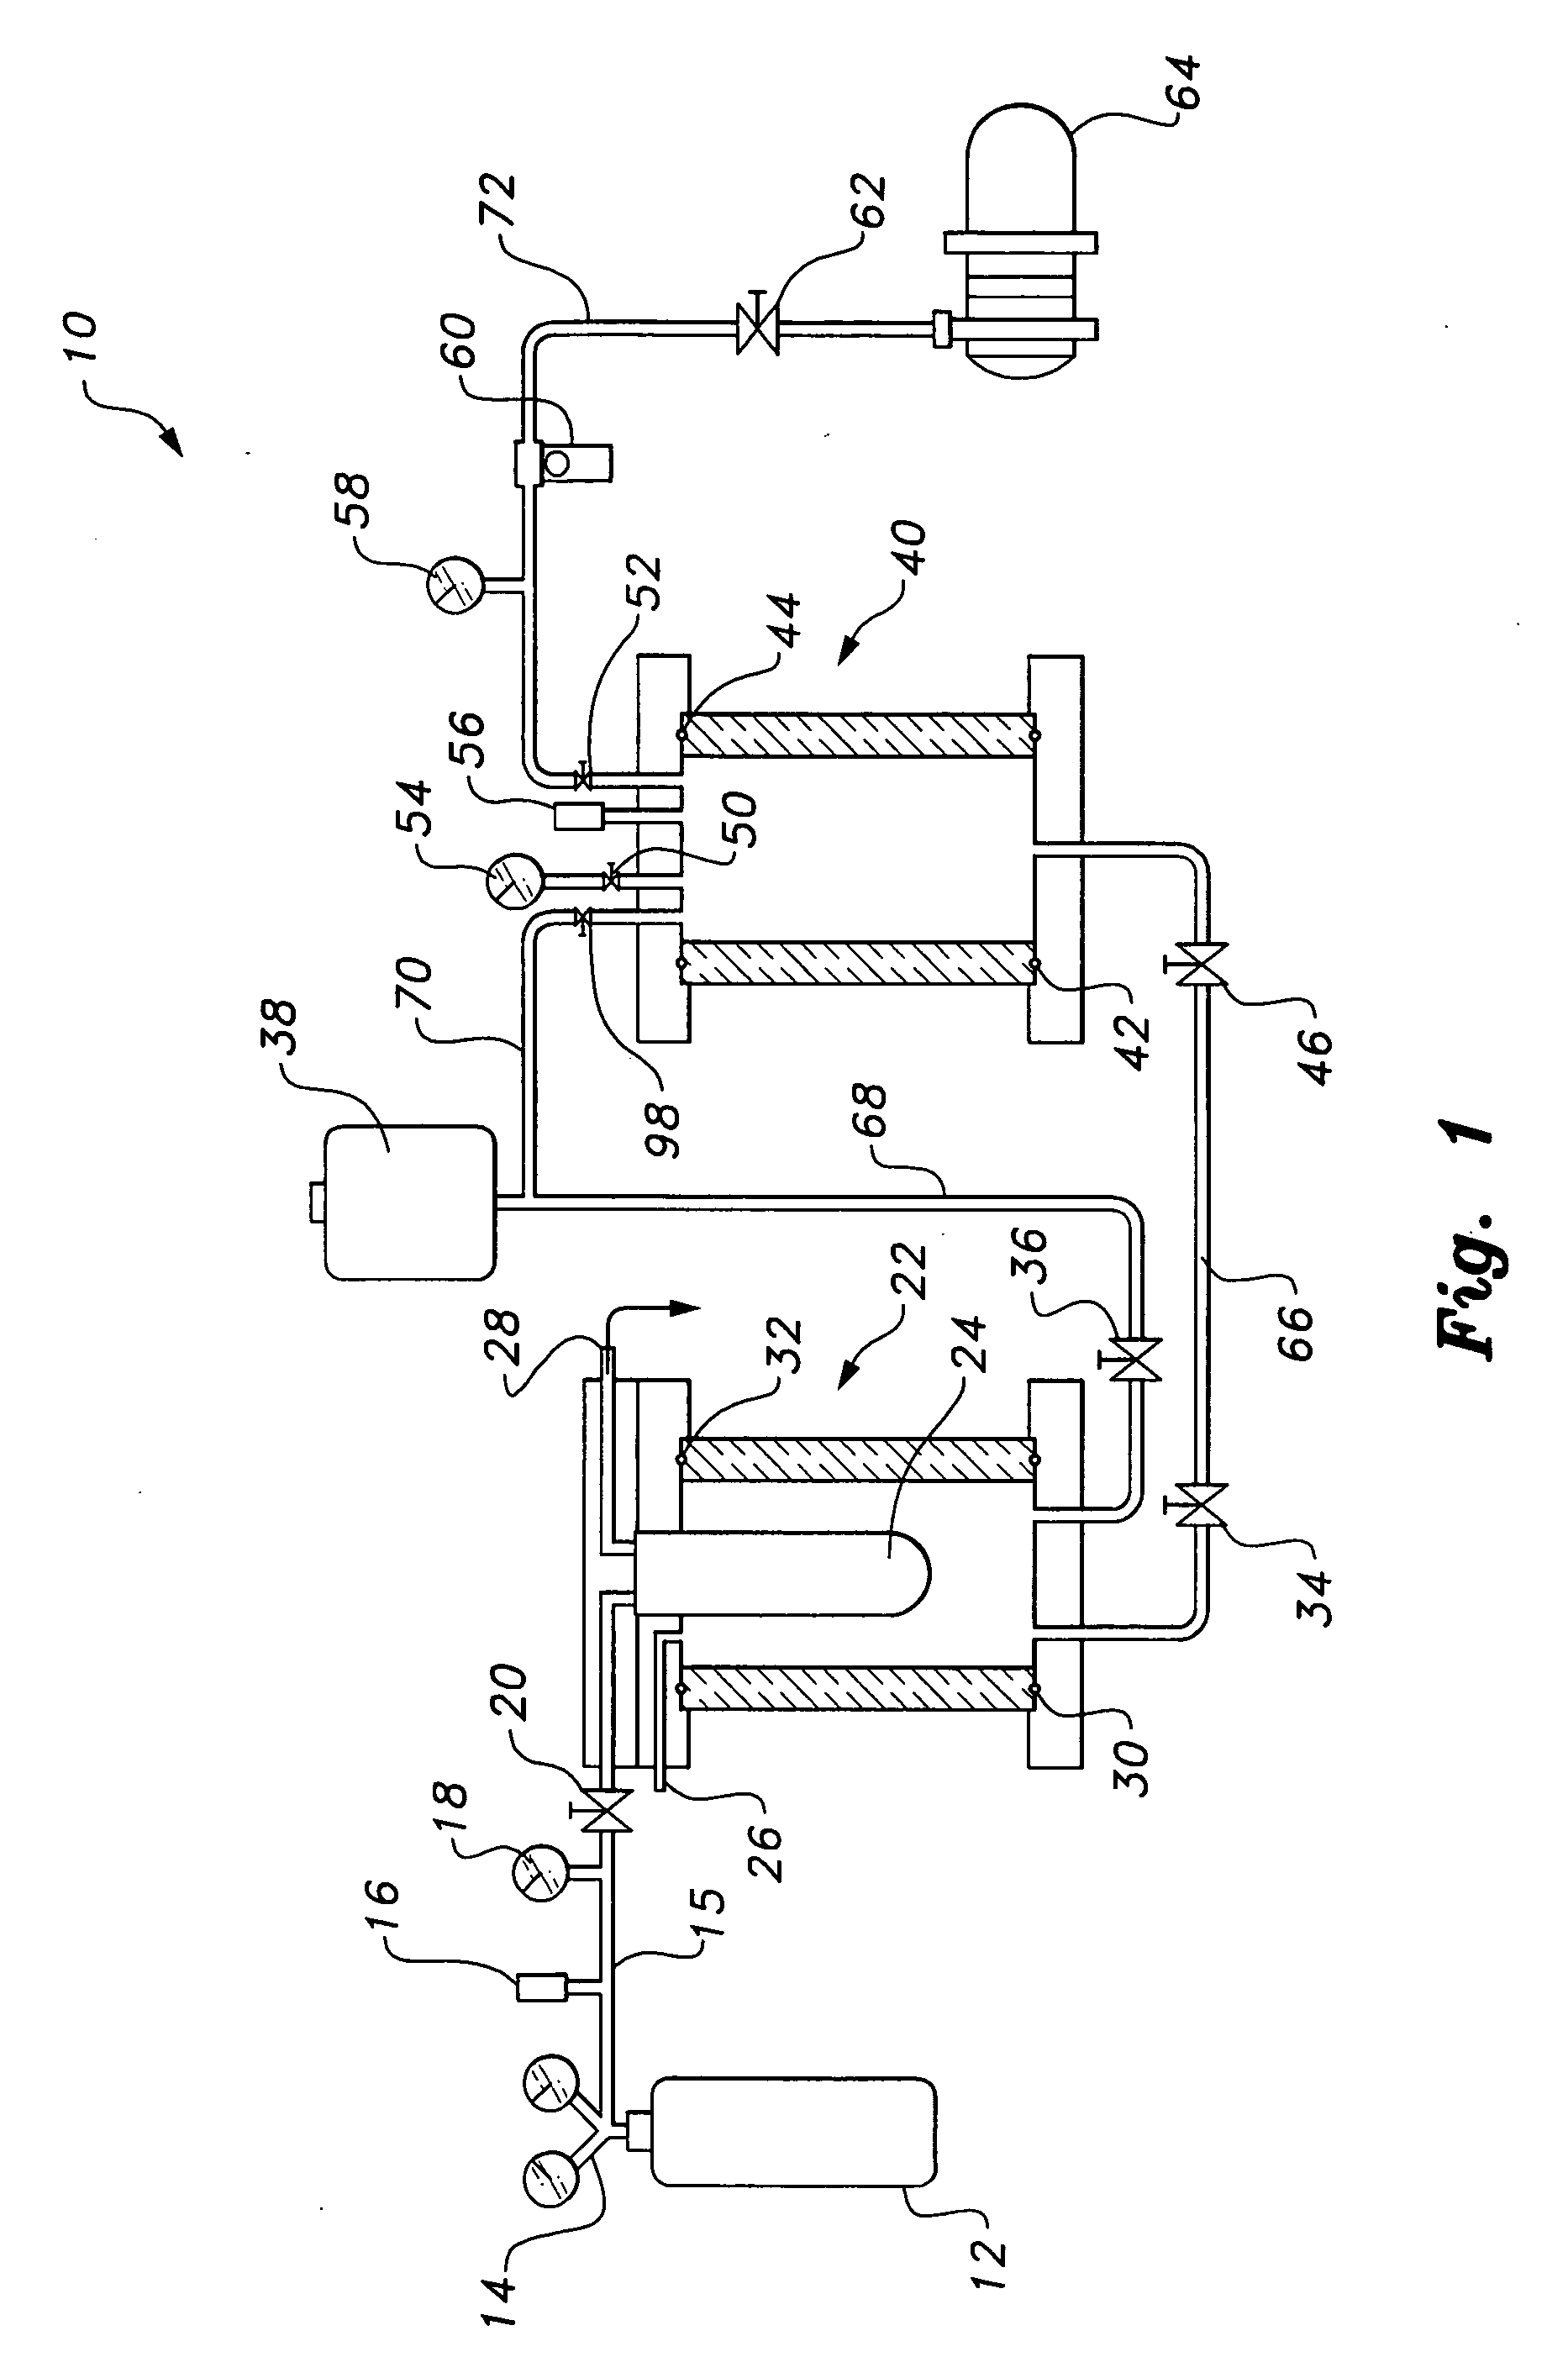 System and method for measuring porosity of high strength and high performance concrete using a vacuum-pressure saturation method